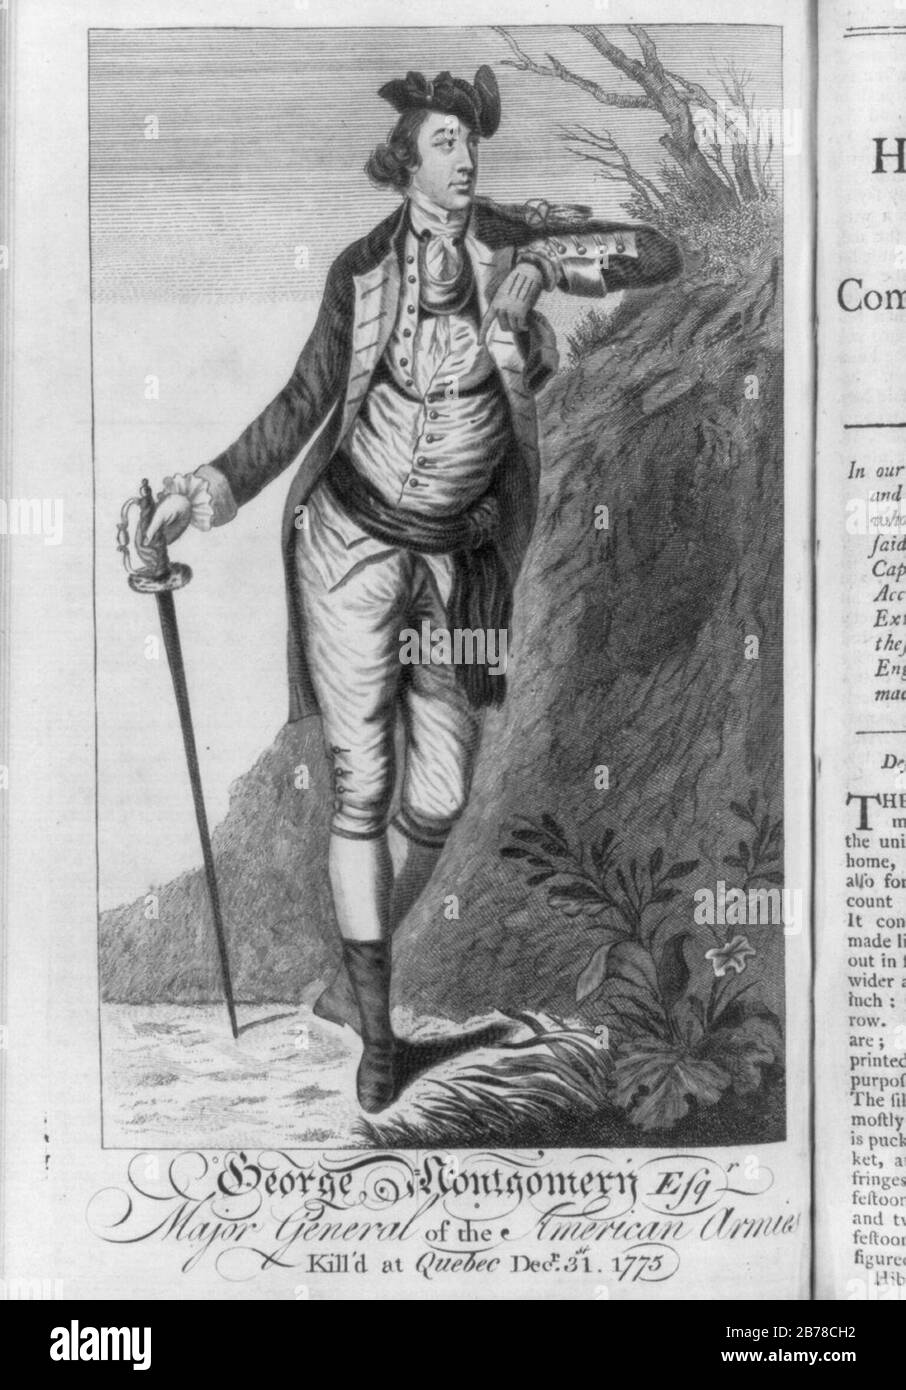 George Montgomery, Esq'r. major general of the American armies - kill'd at Quebec Decr. 31st. 1775 Stock Photo